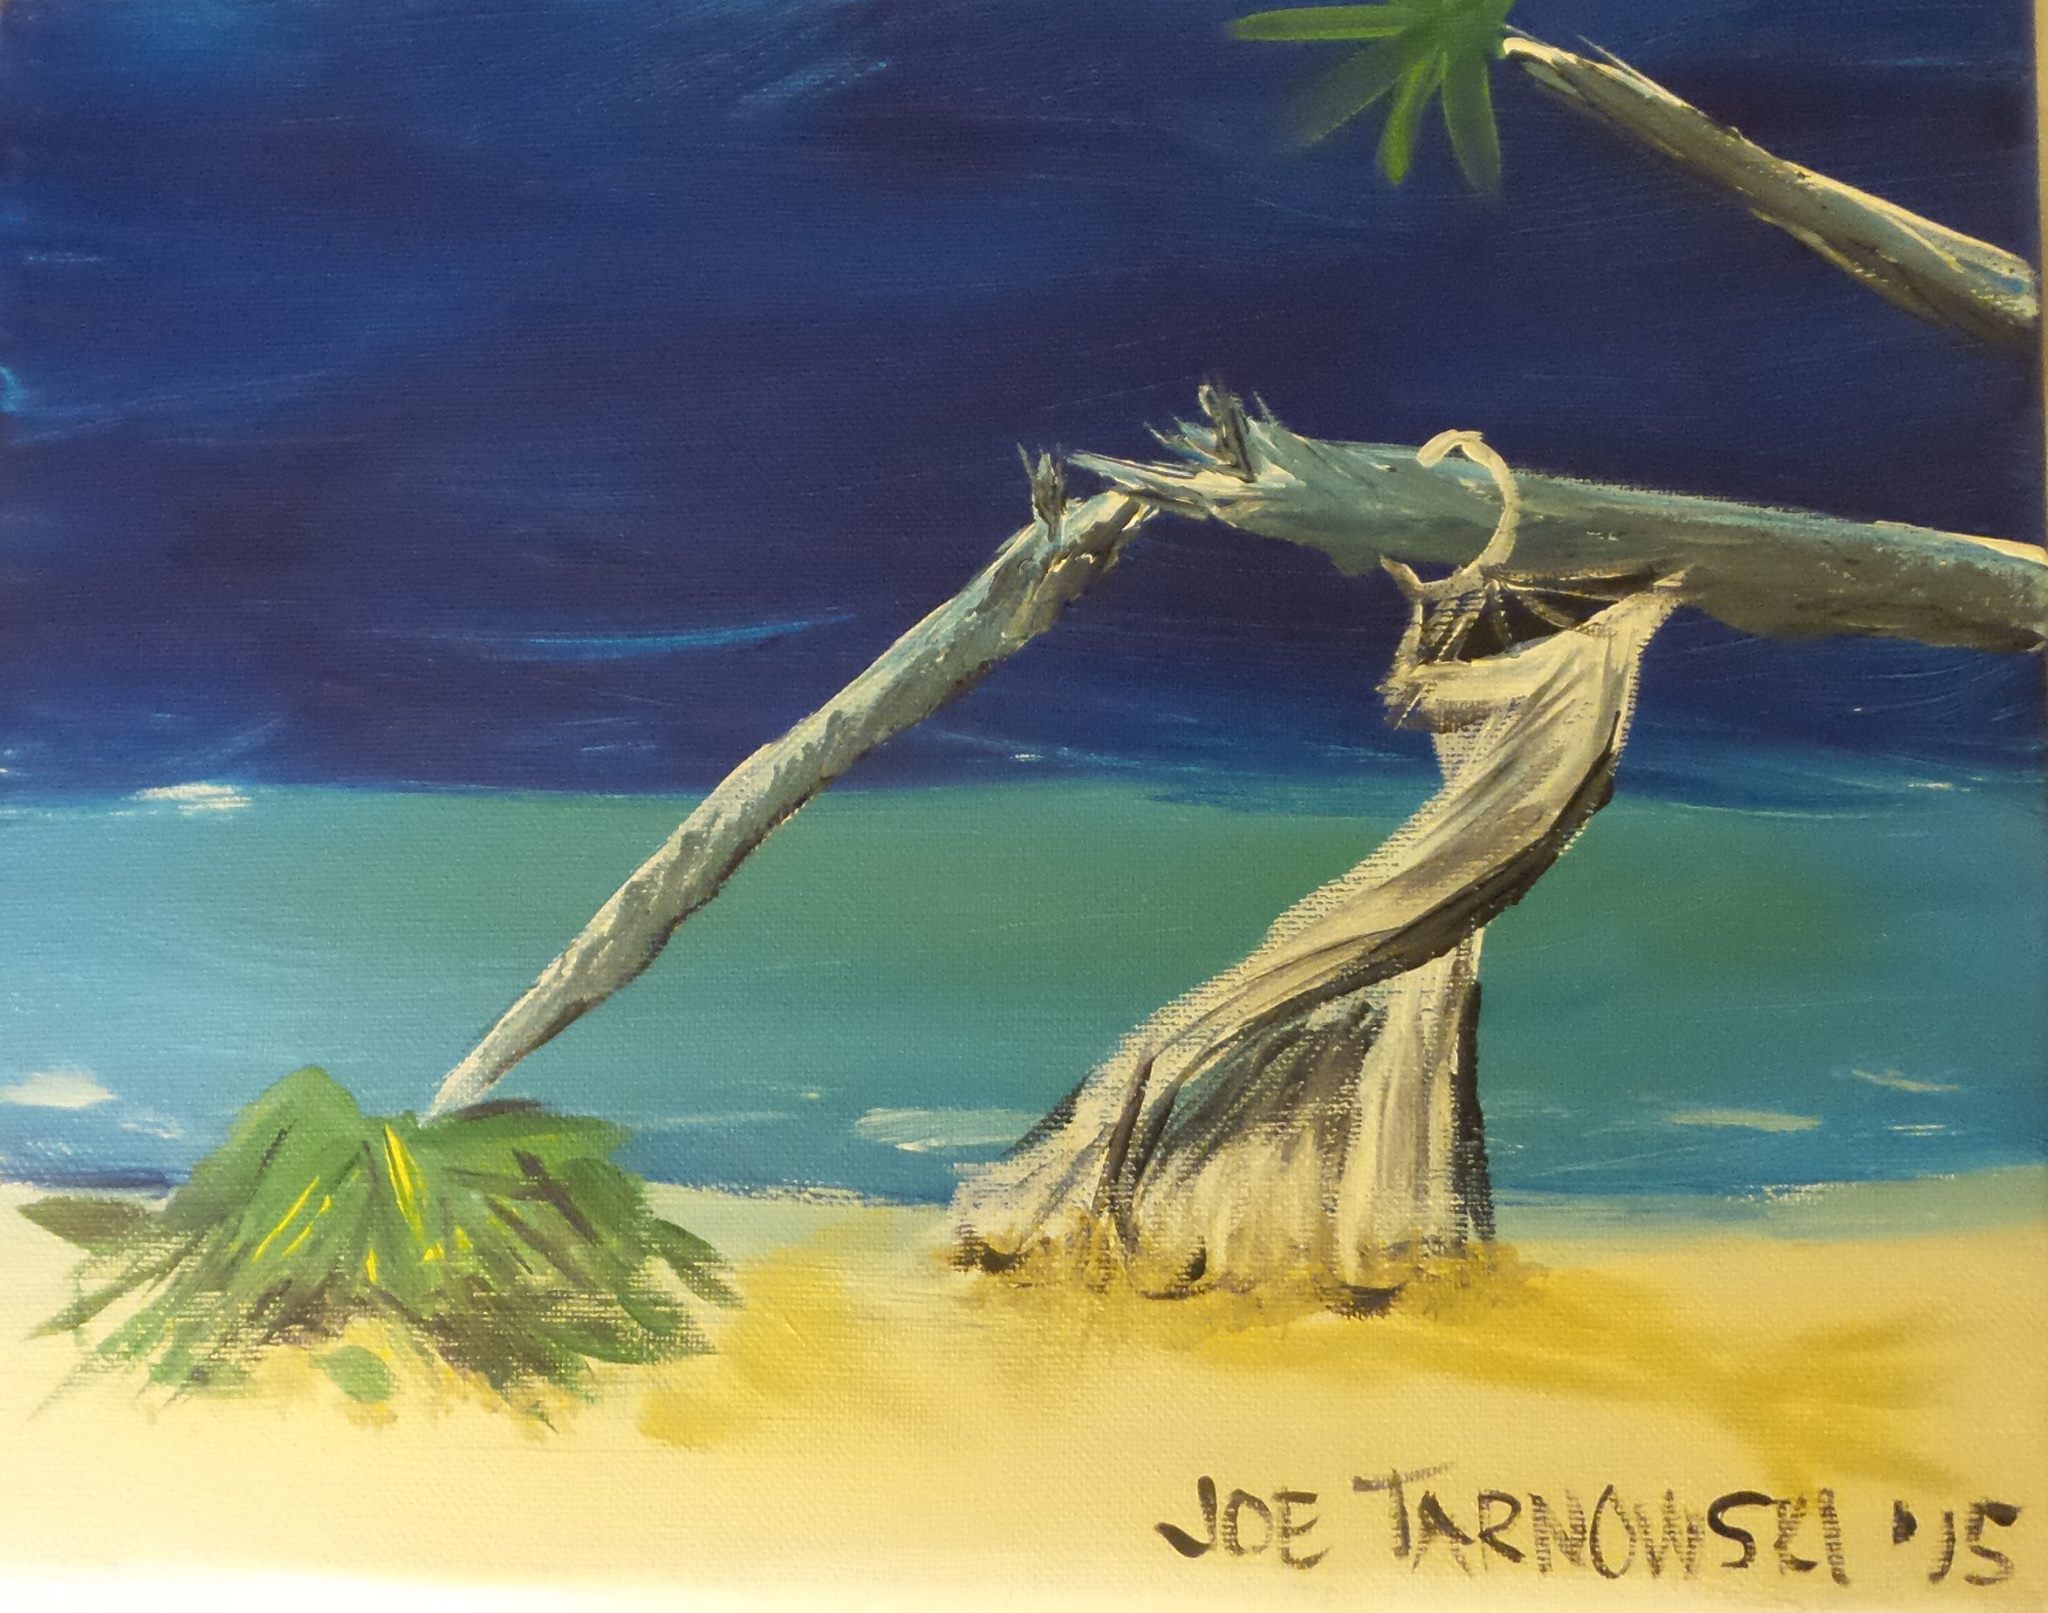 This painting, done during a Wine & Canvas event held at an ECRM EPPS, renewed my interest in watercolors.